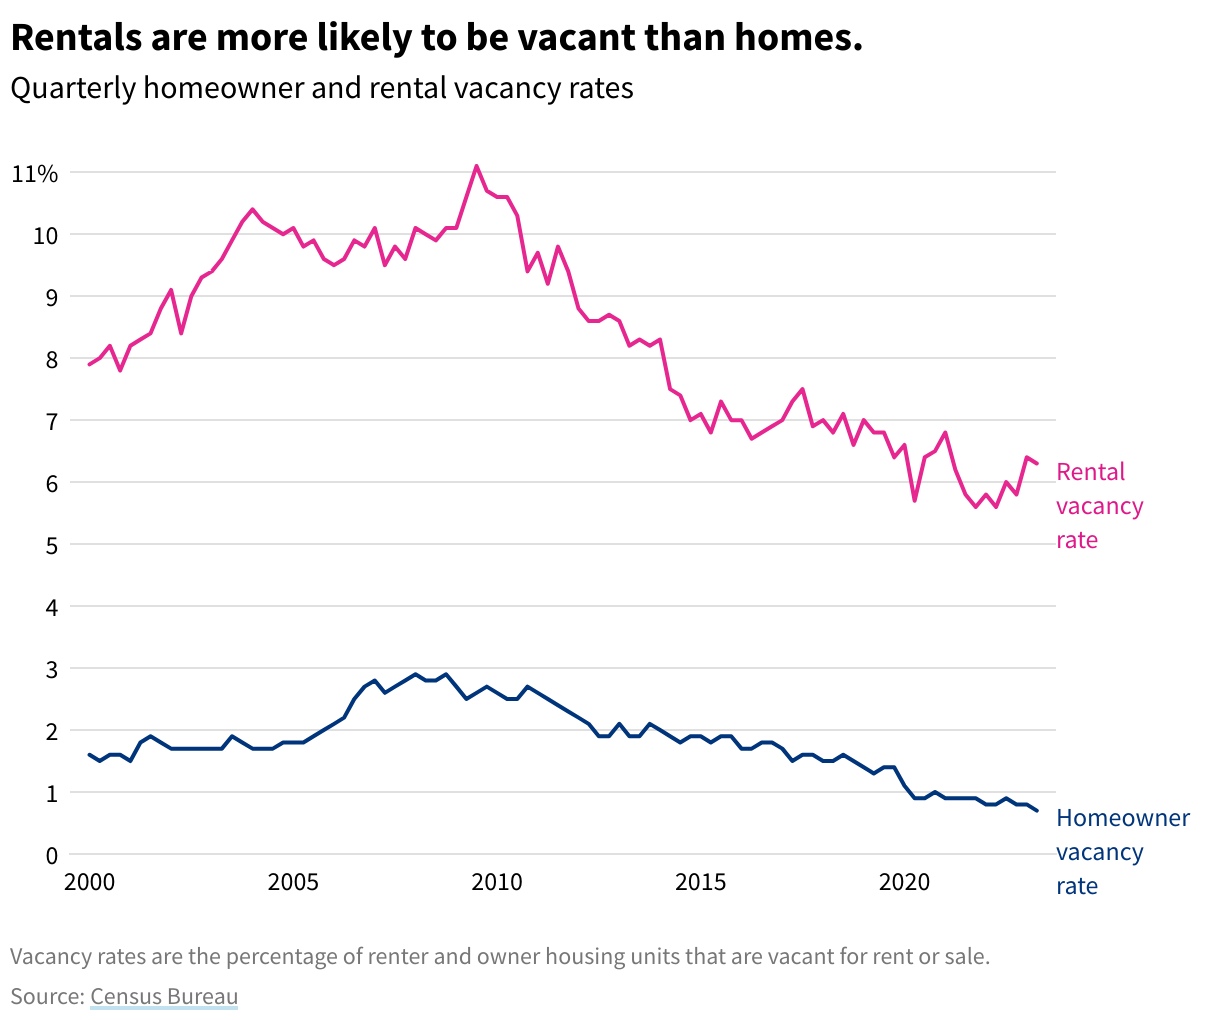 Line chart showing home and rental vacancy over time by quarter.